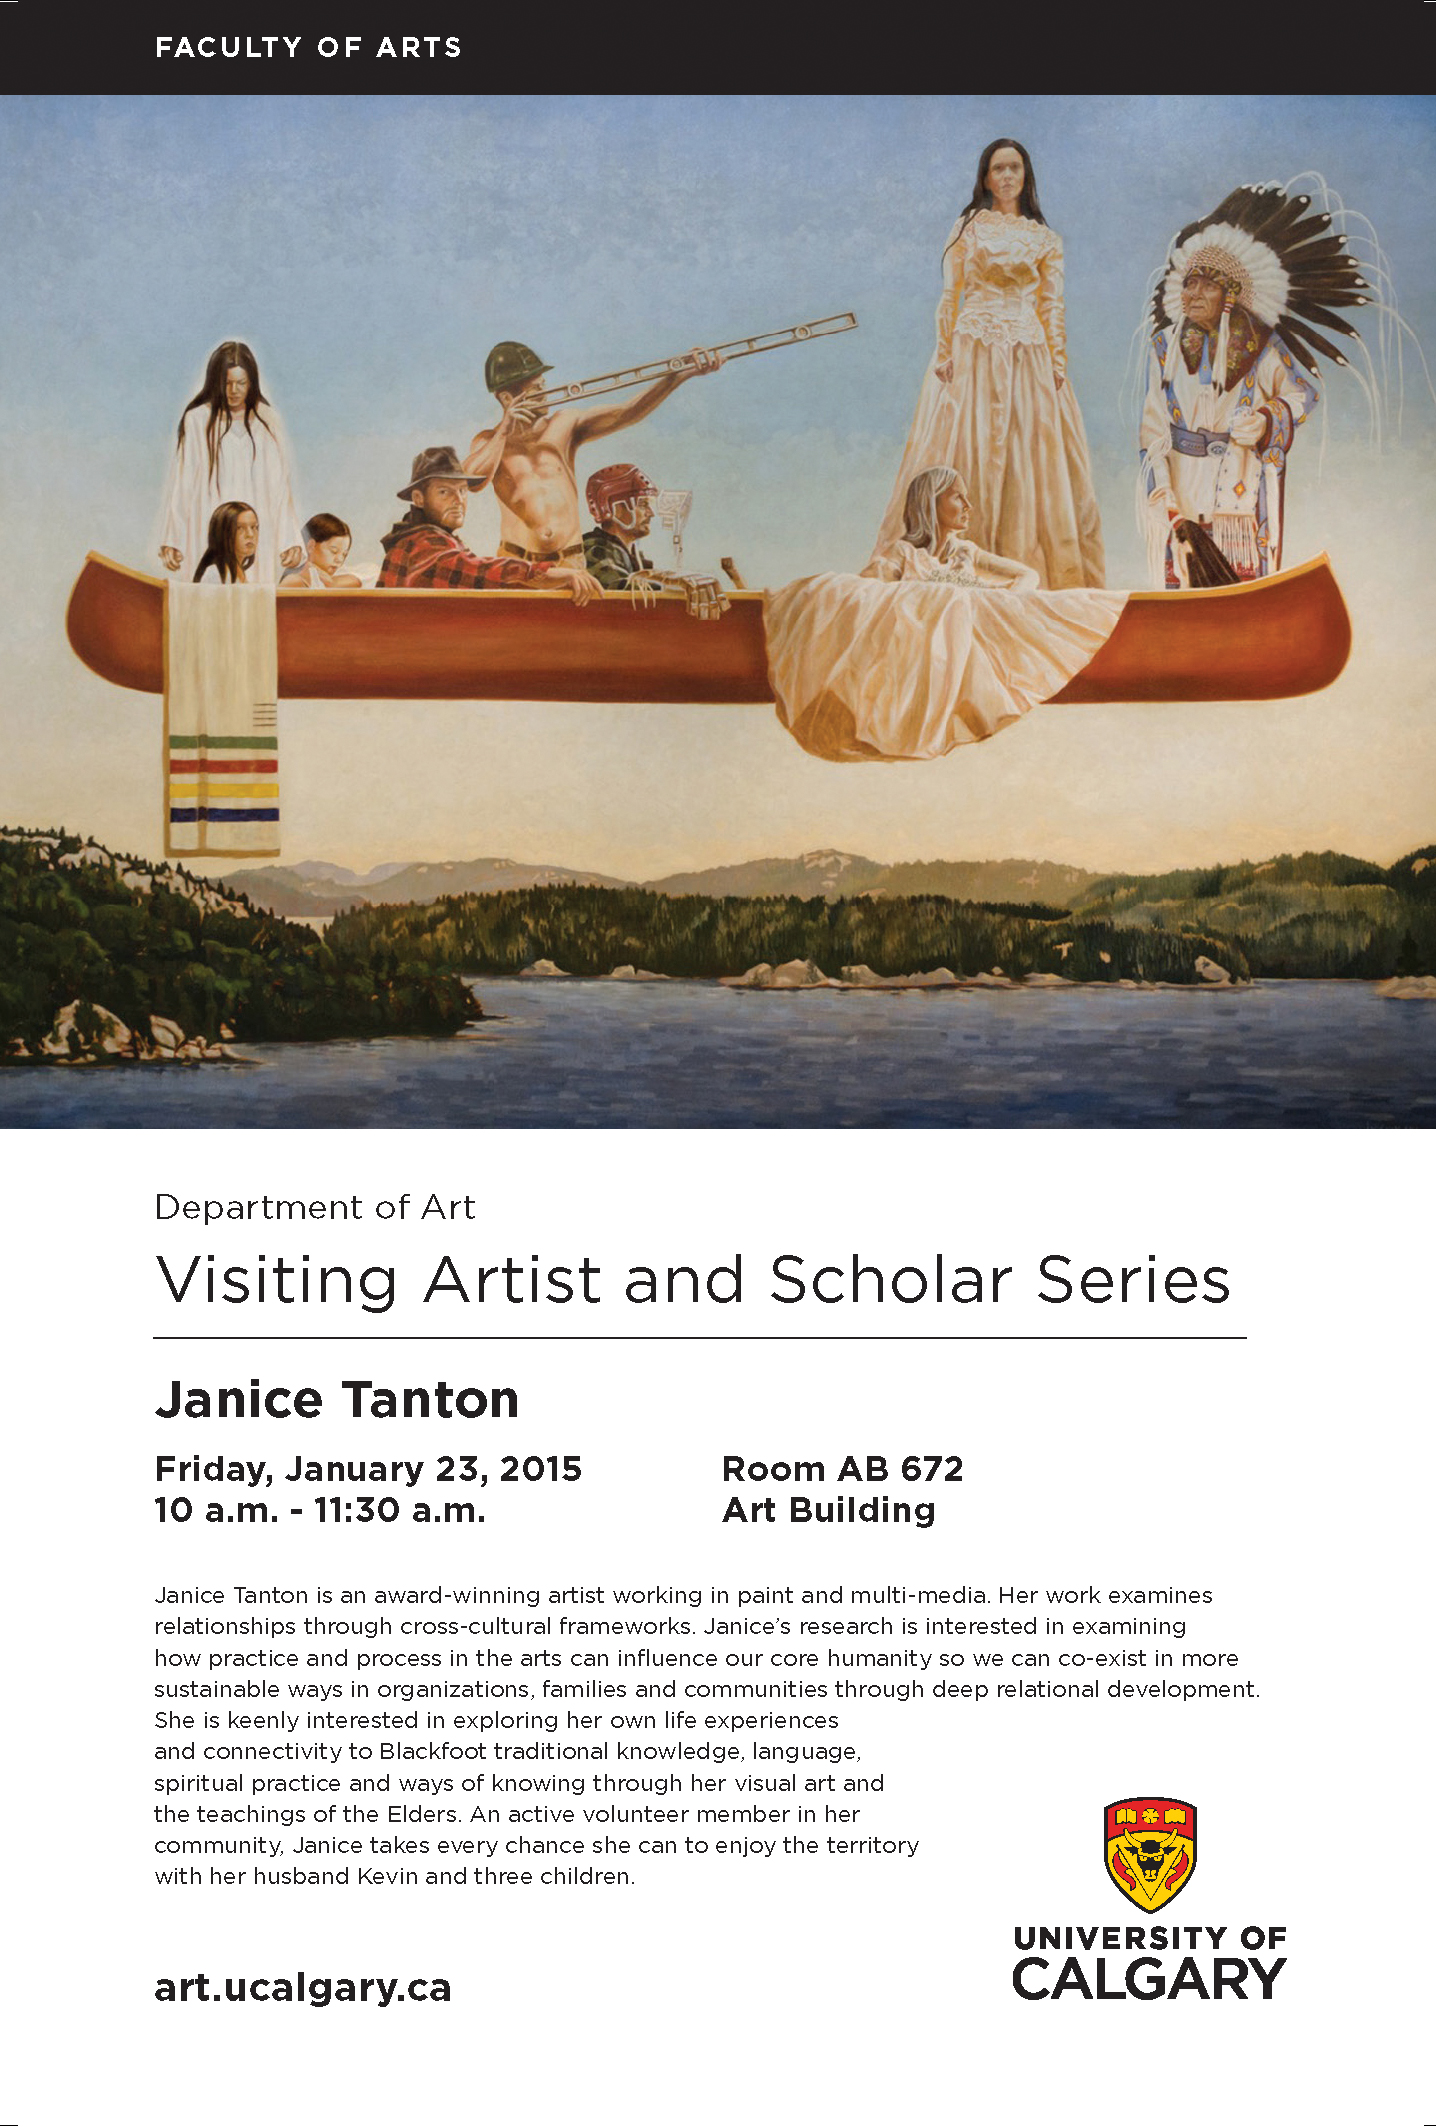 Join me for an Artist Talk as the Visiting Artist and Scholar, Friday, January 23rd at the University of Calgary, Calgary, AB